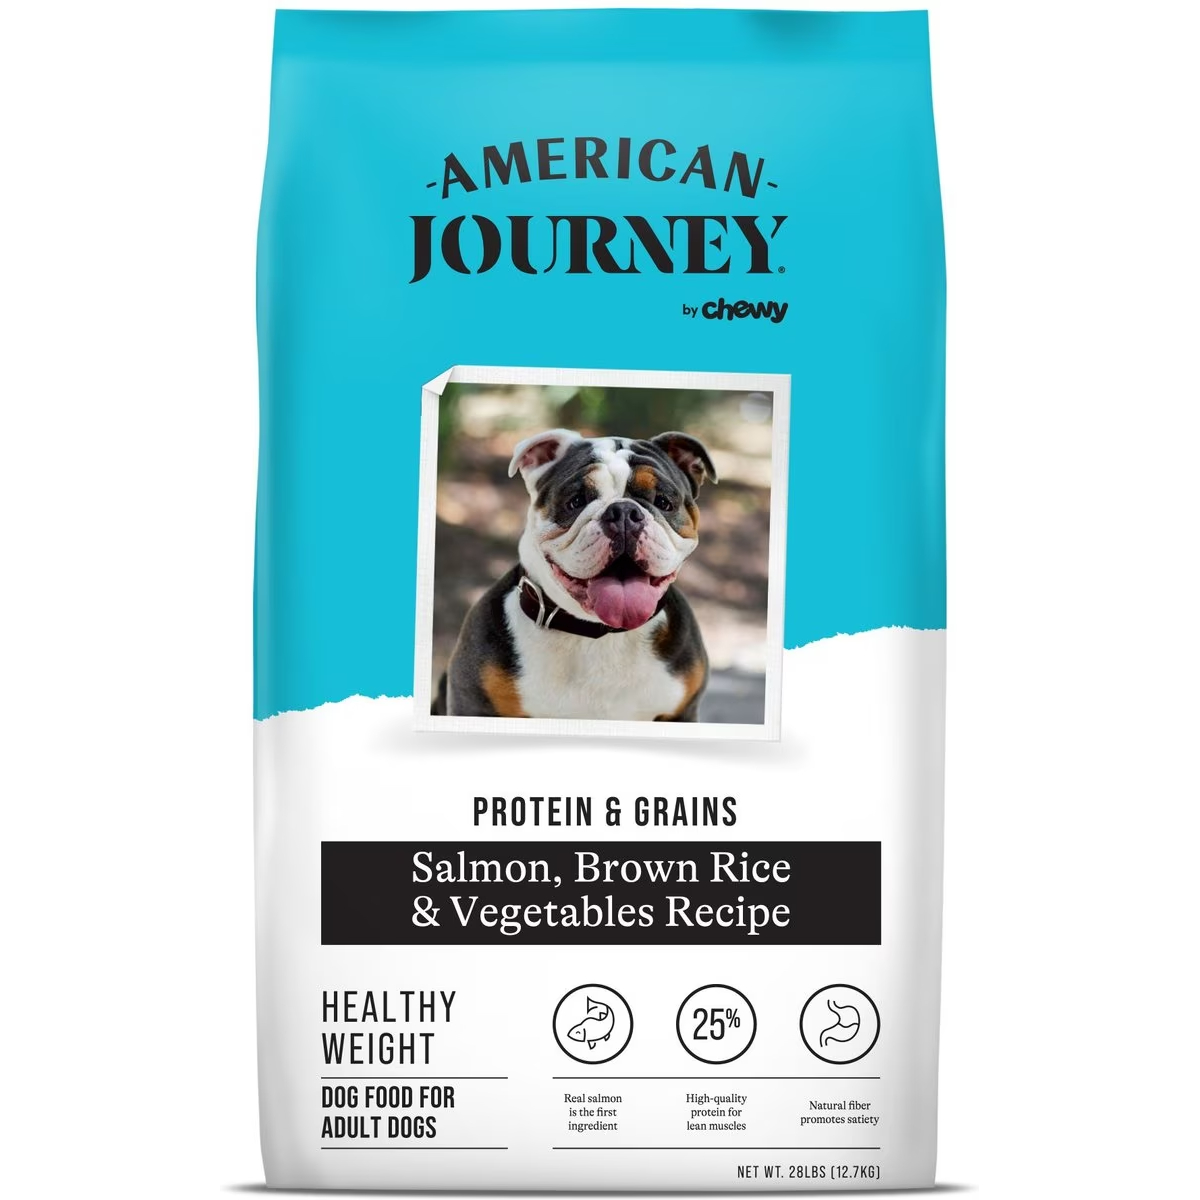 American Journey Protein & Grains Healthy Weight Salmon, Brown Rice & Vegetables Recipe Dry Dog Food 